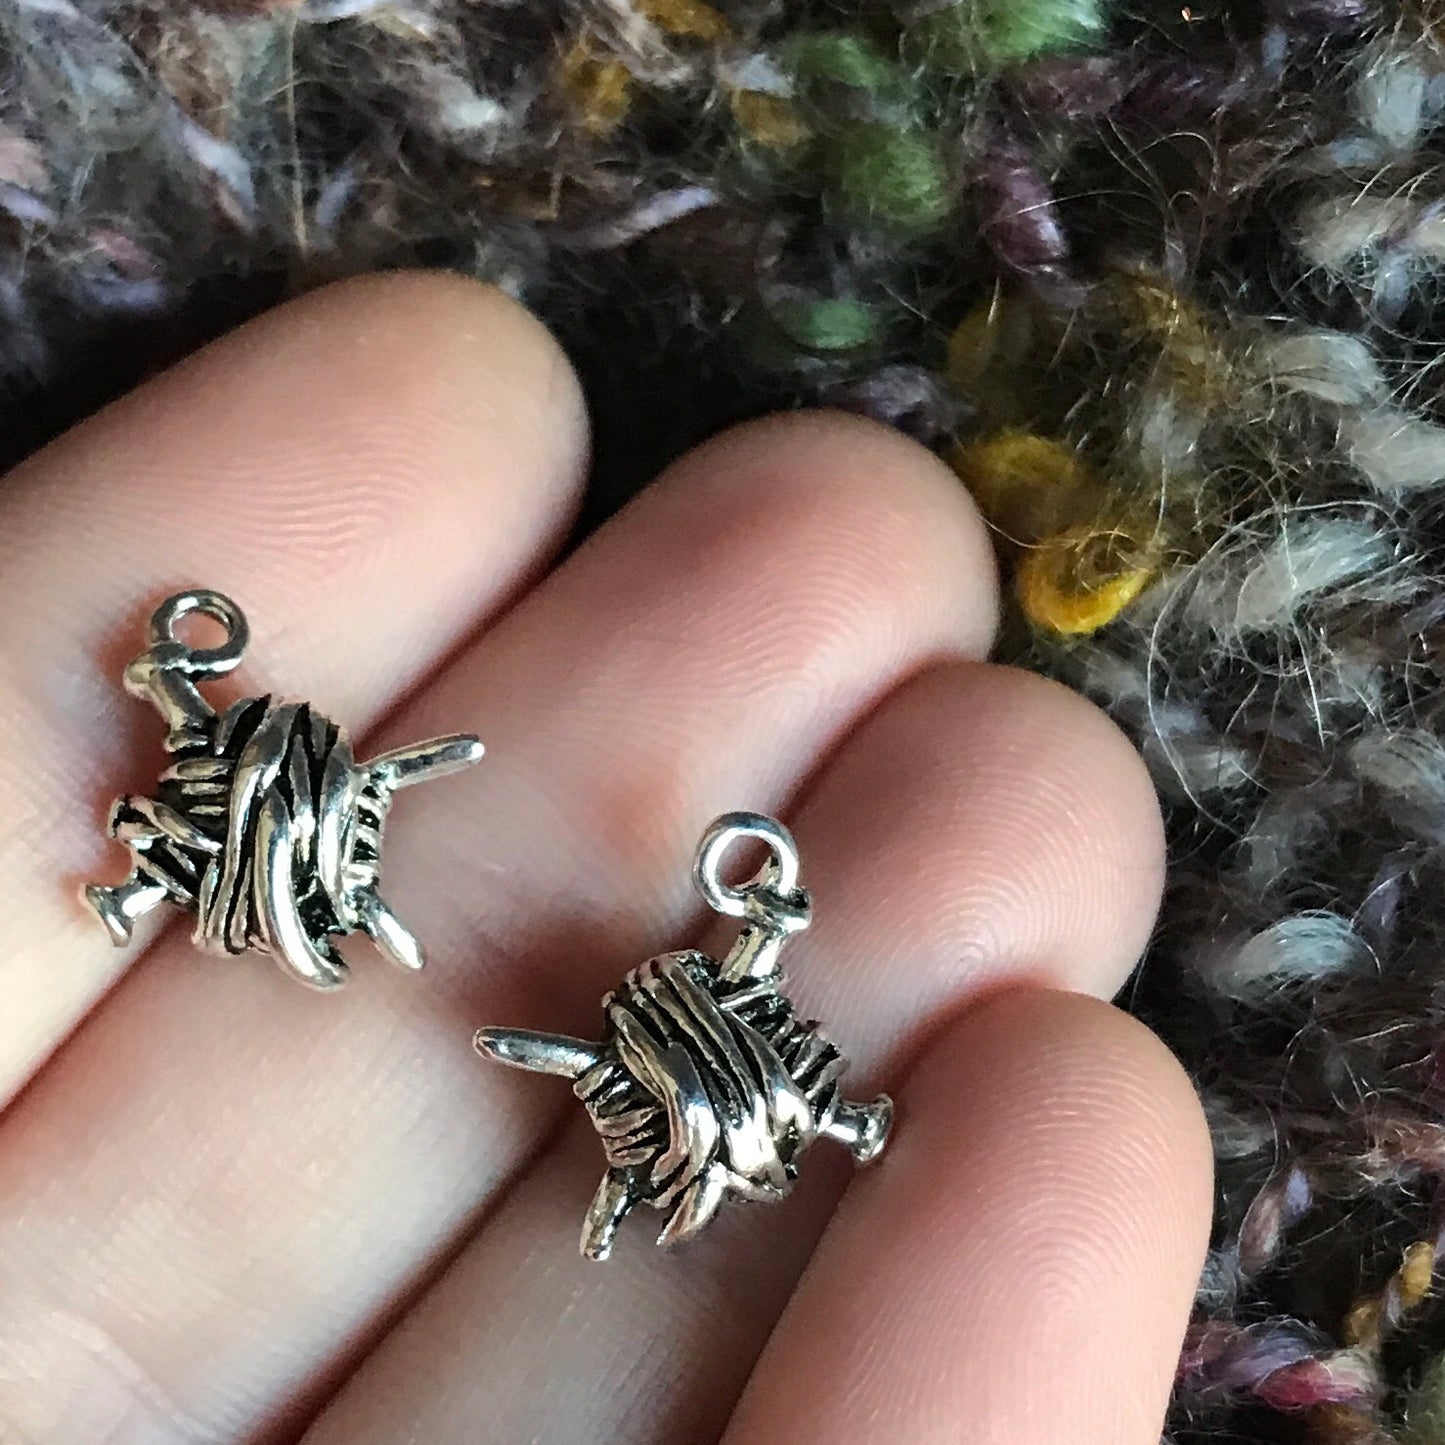 So I Don’t Kill People: design-your-own knitting earrings!